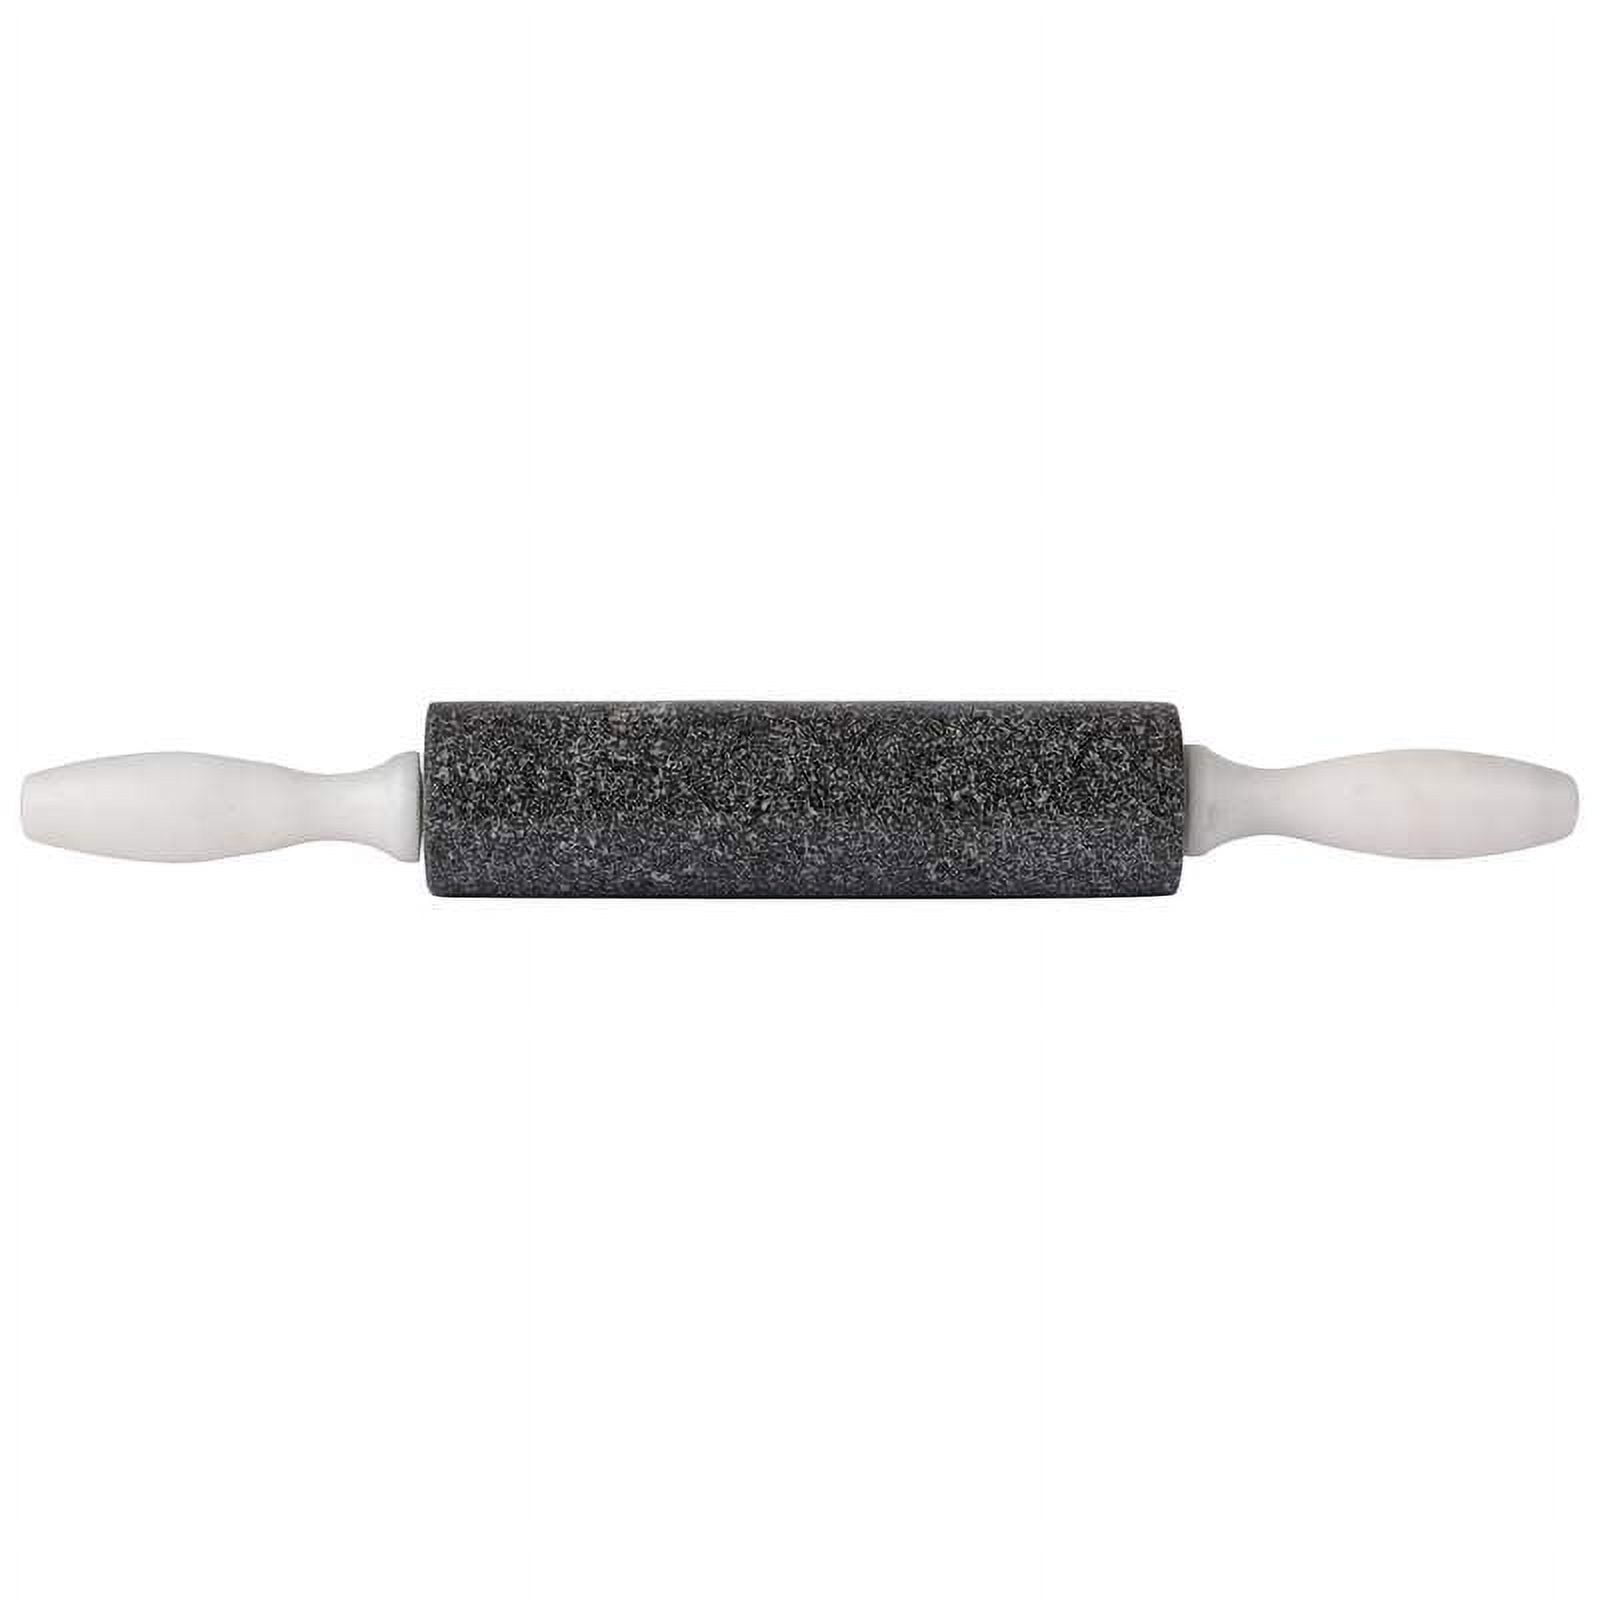 16 In. Charcoal Colored Granite Rolling Pin